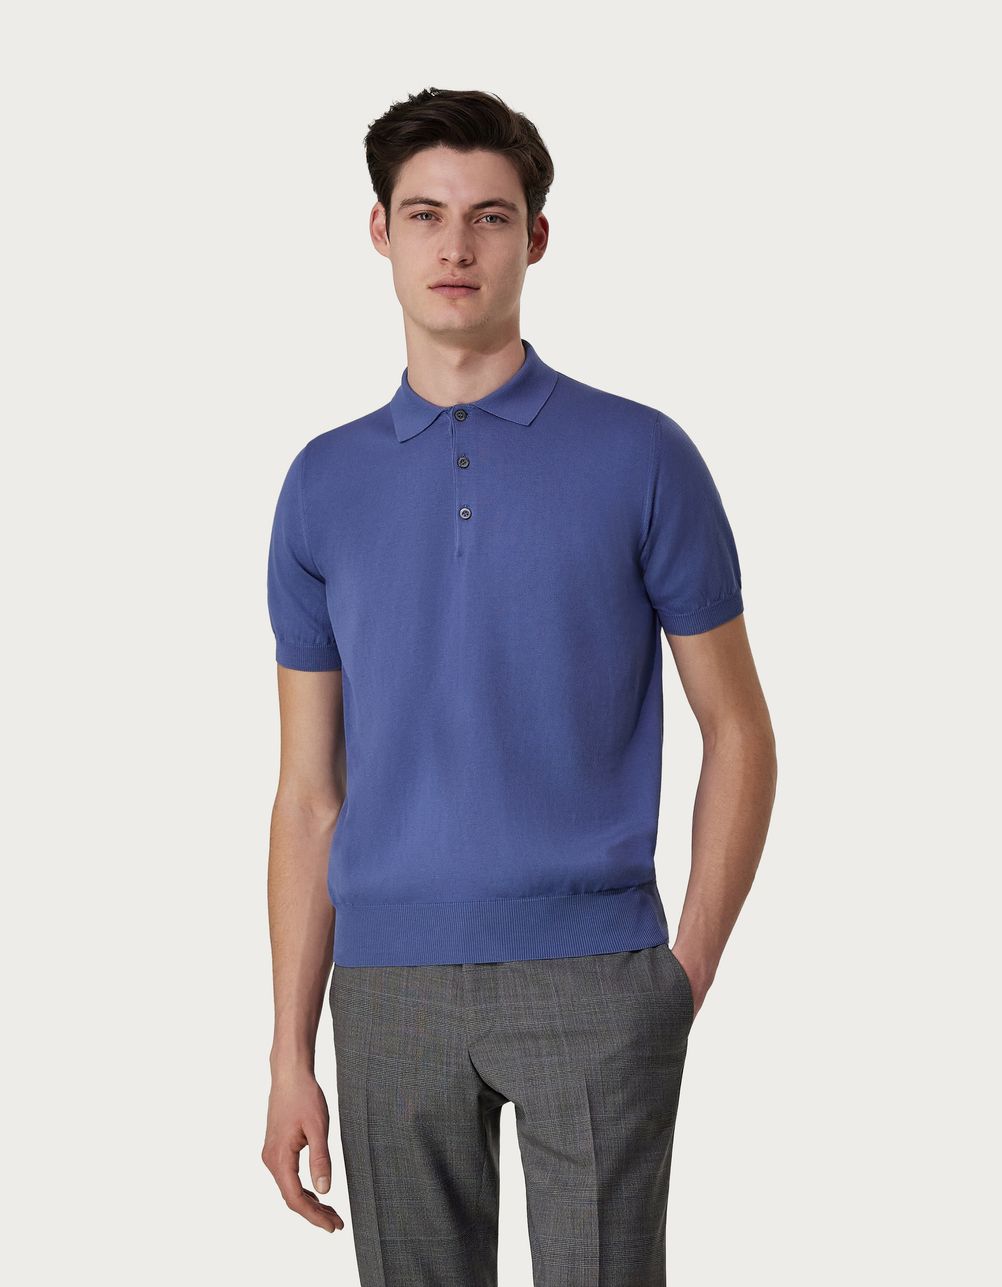 Air-force-blue polo shirt in garment-dyed shaved cotton